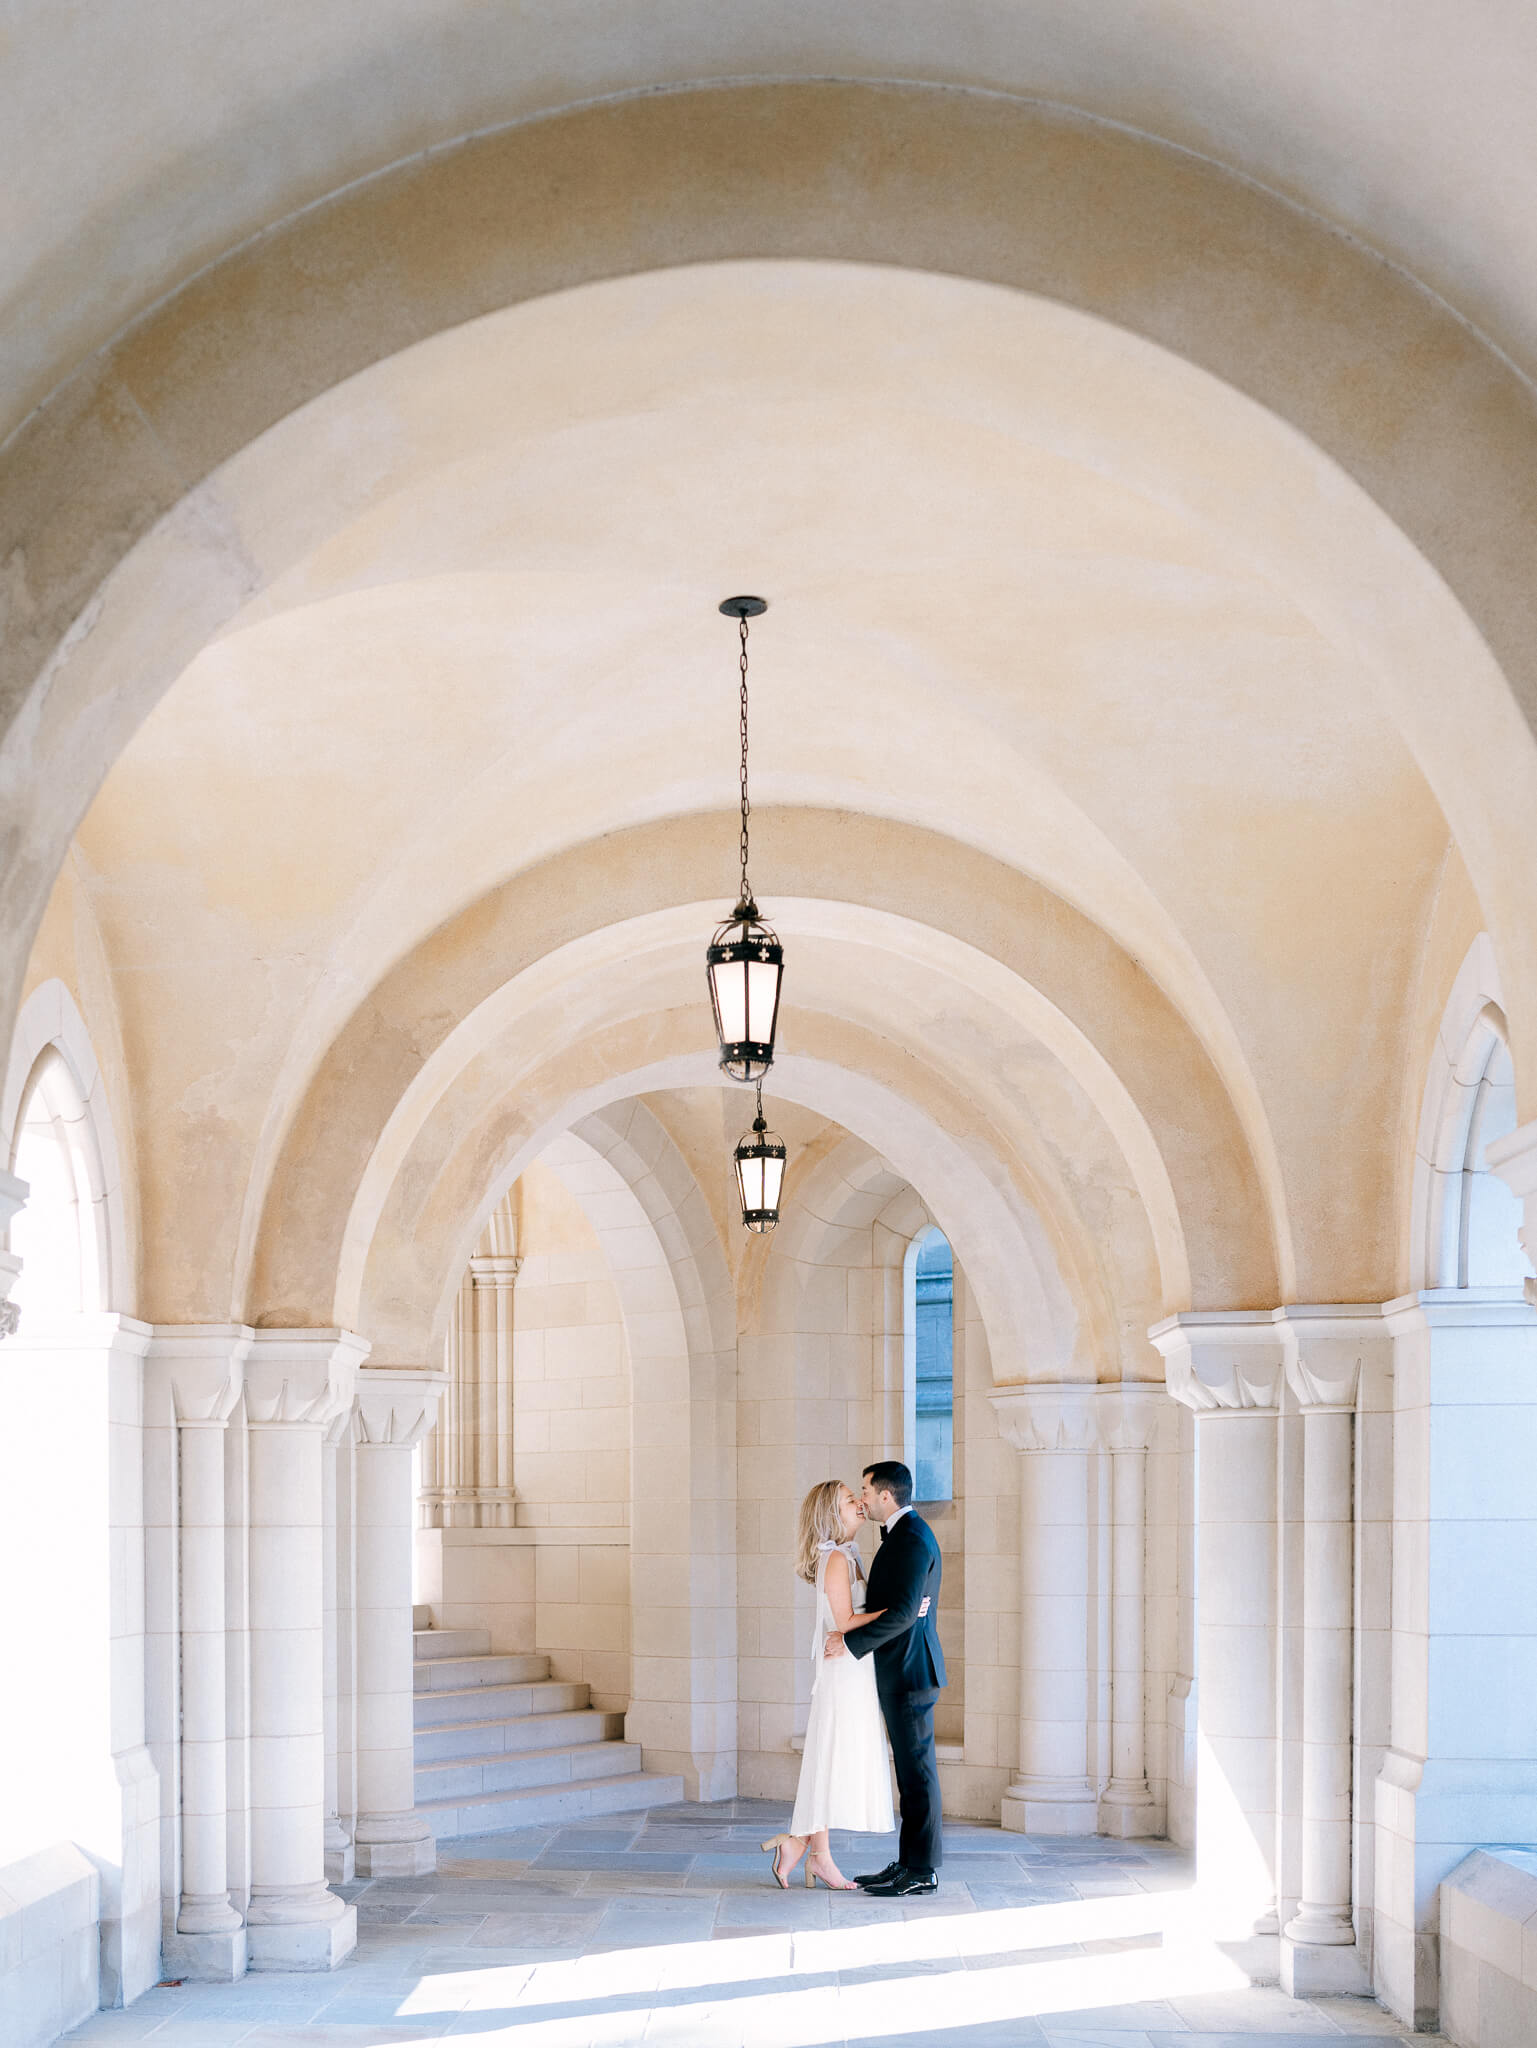 A couple embracing in the arches of the National Cathedral in Washington, D.C.